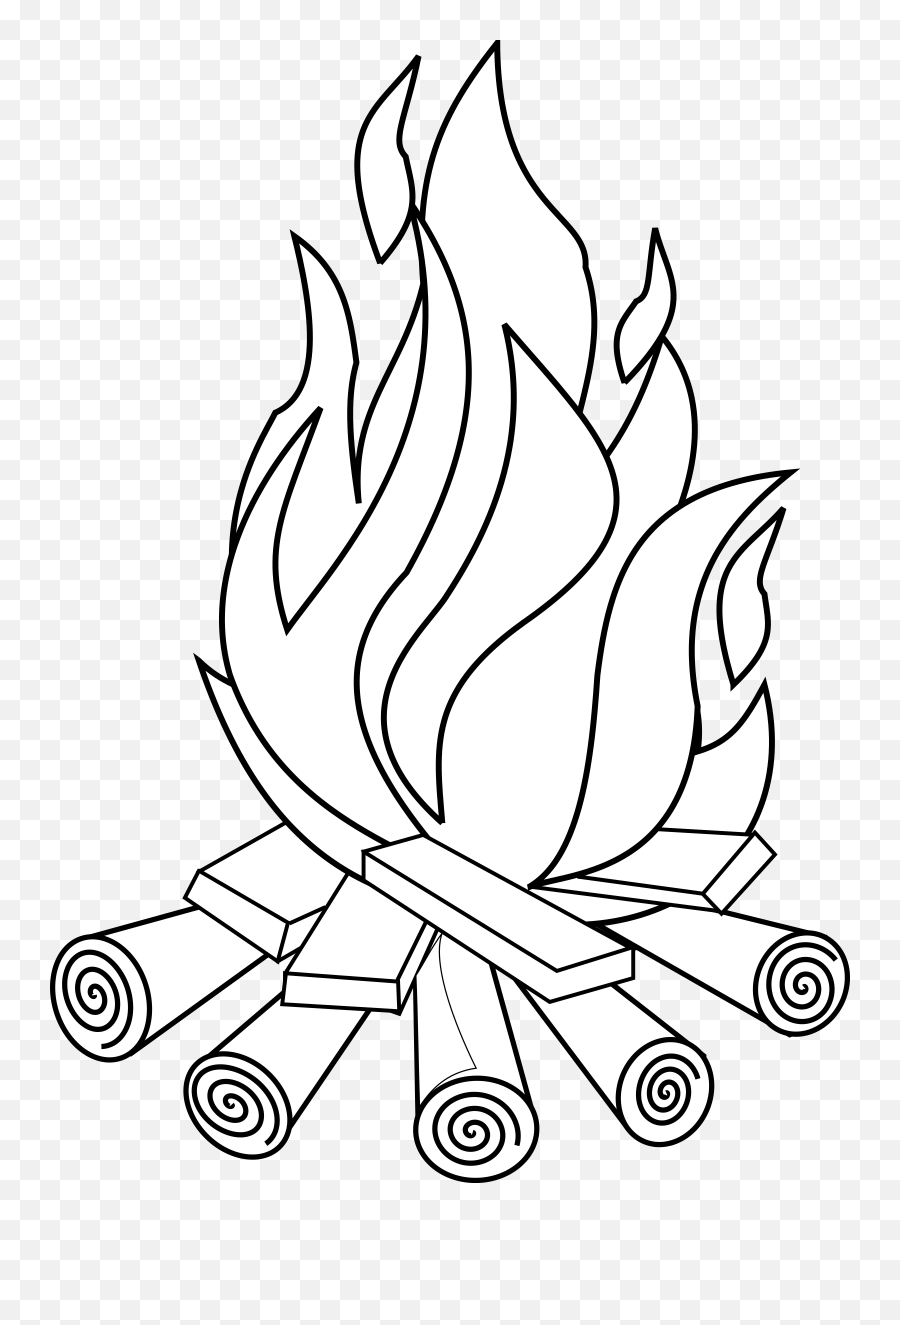 Fire Coloring Pages Printable U2013 Madalenoformaryland - Fire Coloring Pages Emoji,Coloring Clipart